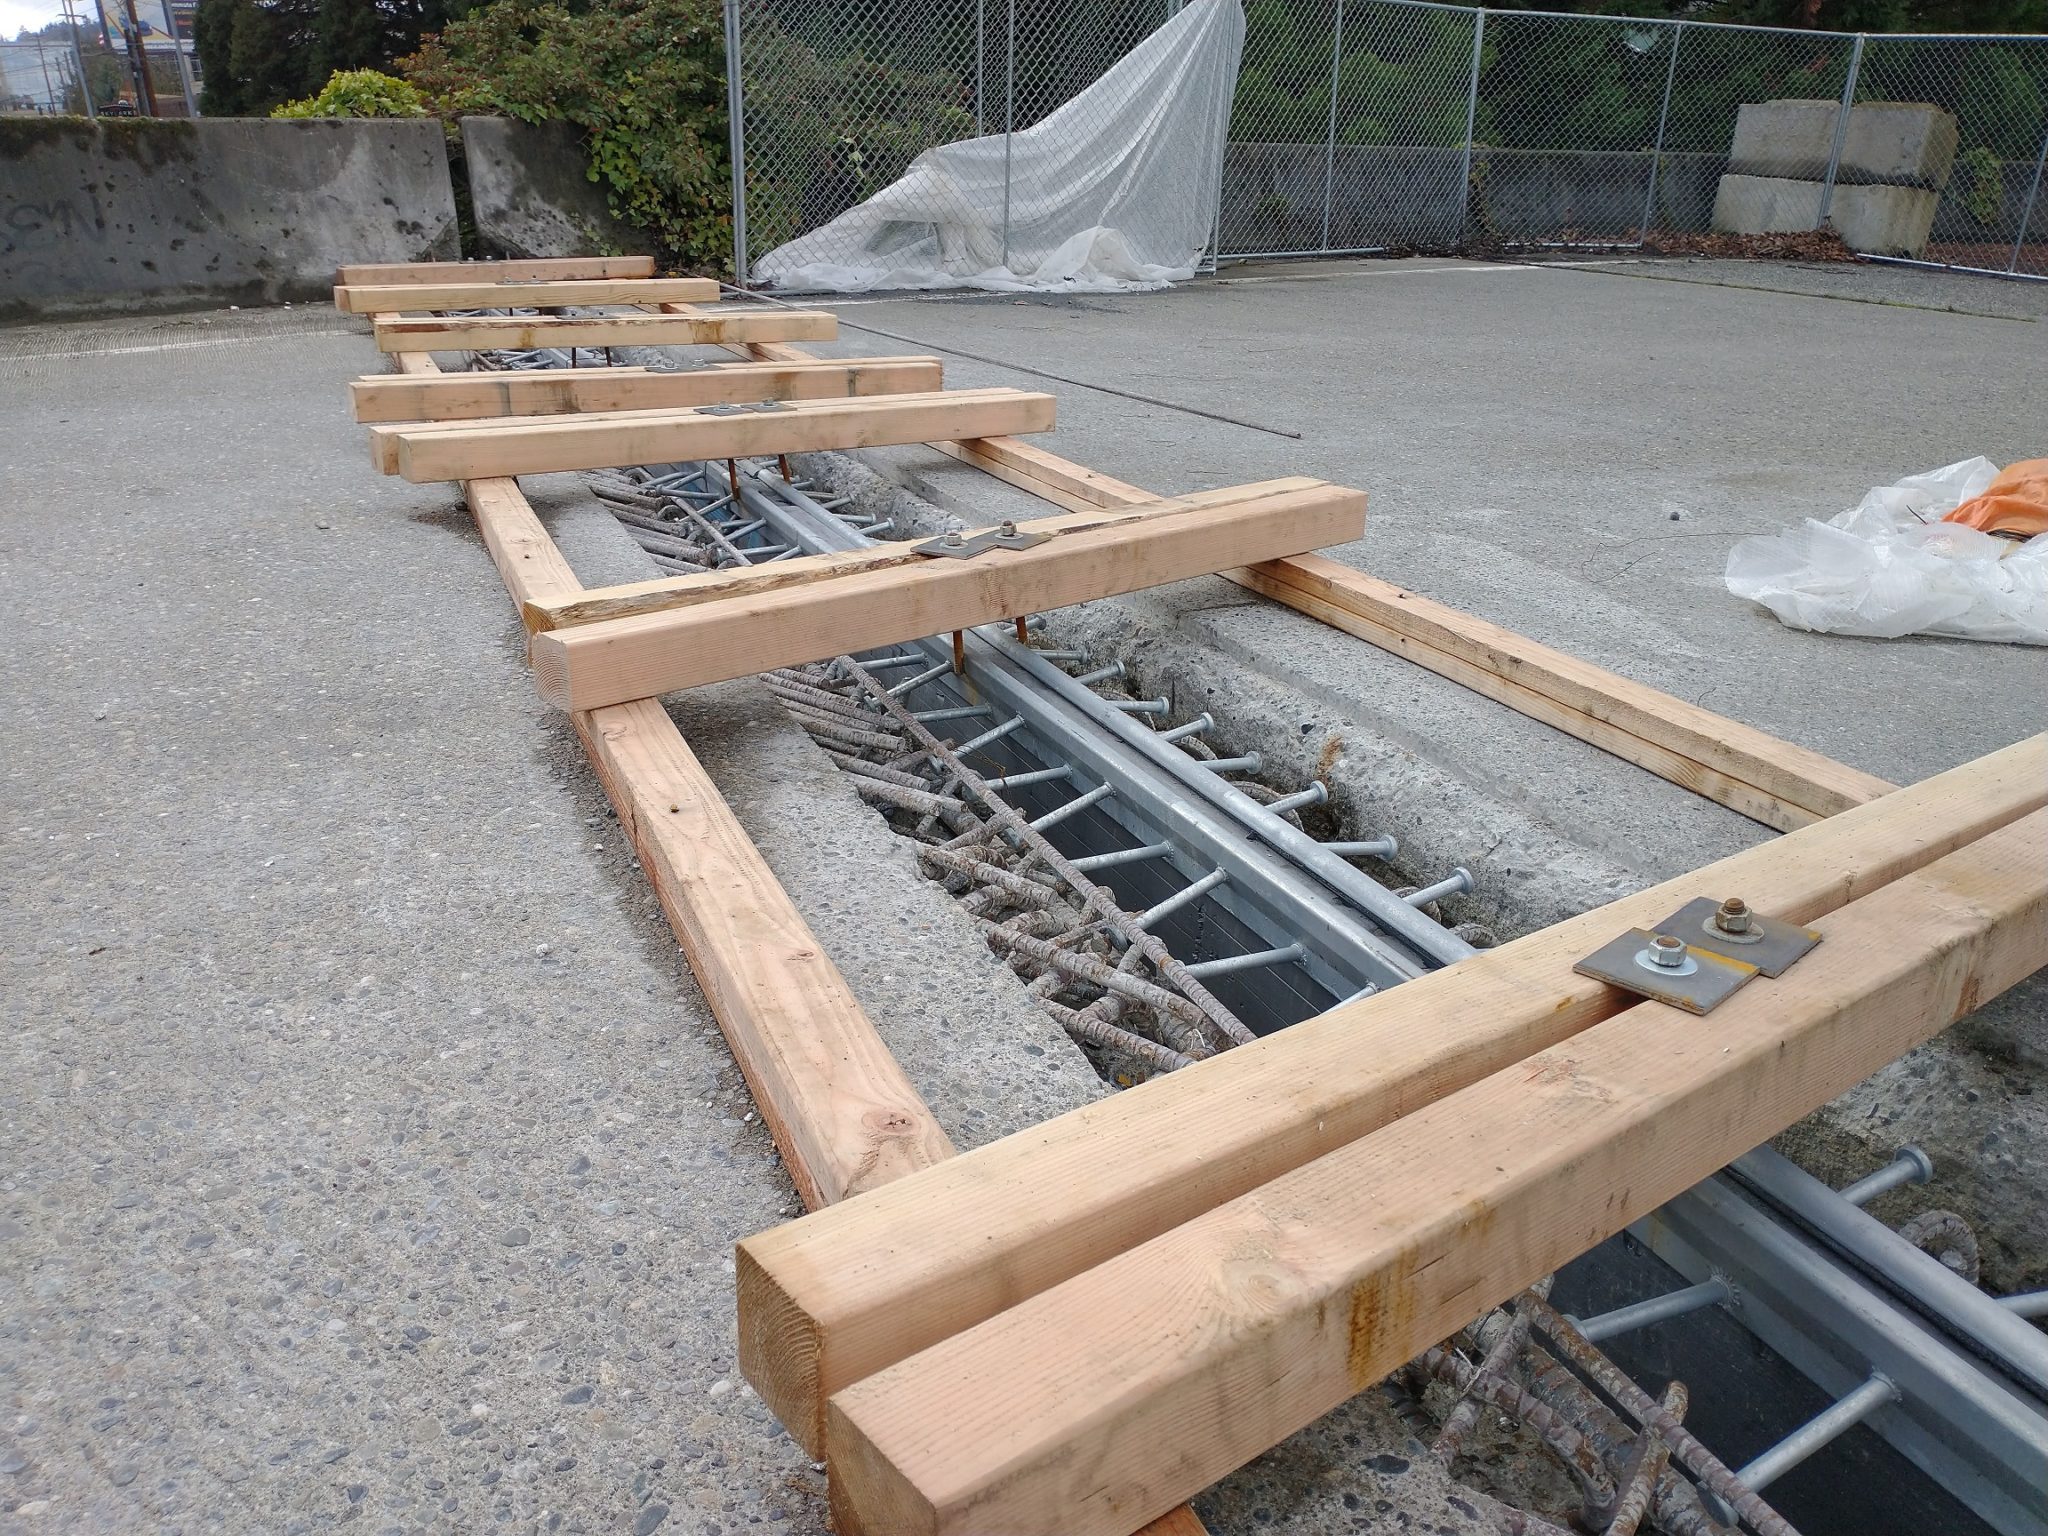 As the seasons change, varying temperatures cause bridges to expand and contract. This photo shows an expansion joint on the bridge, including large pieces of wood on top.